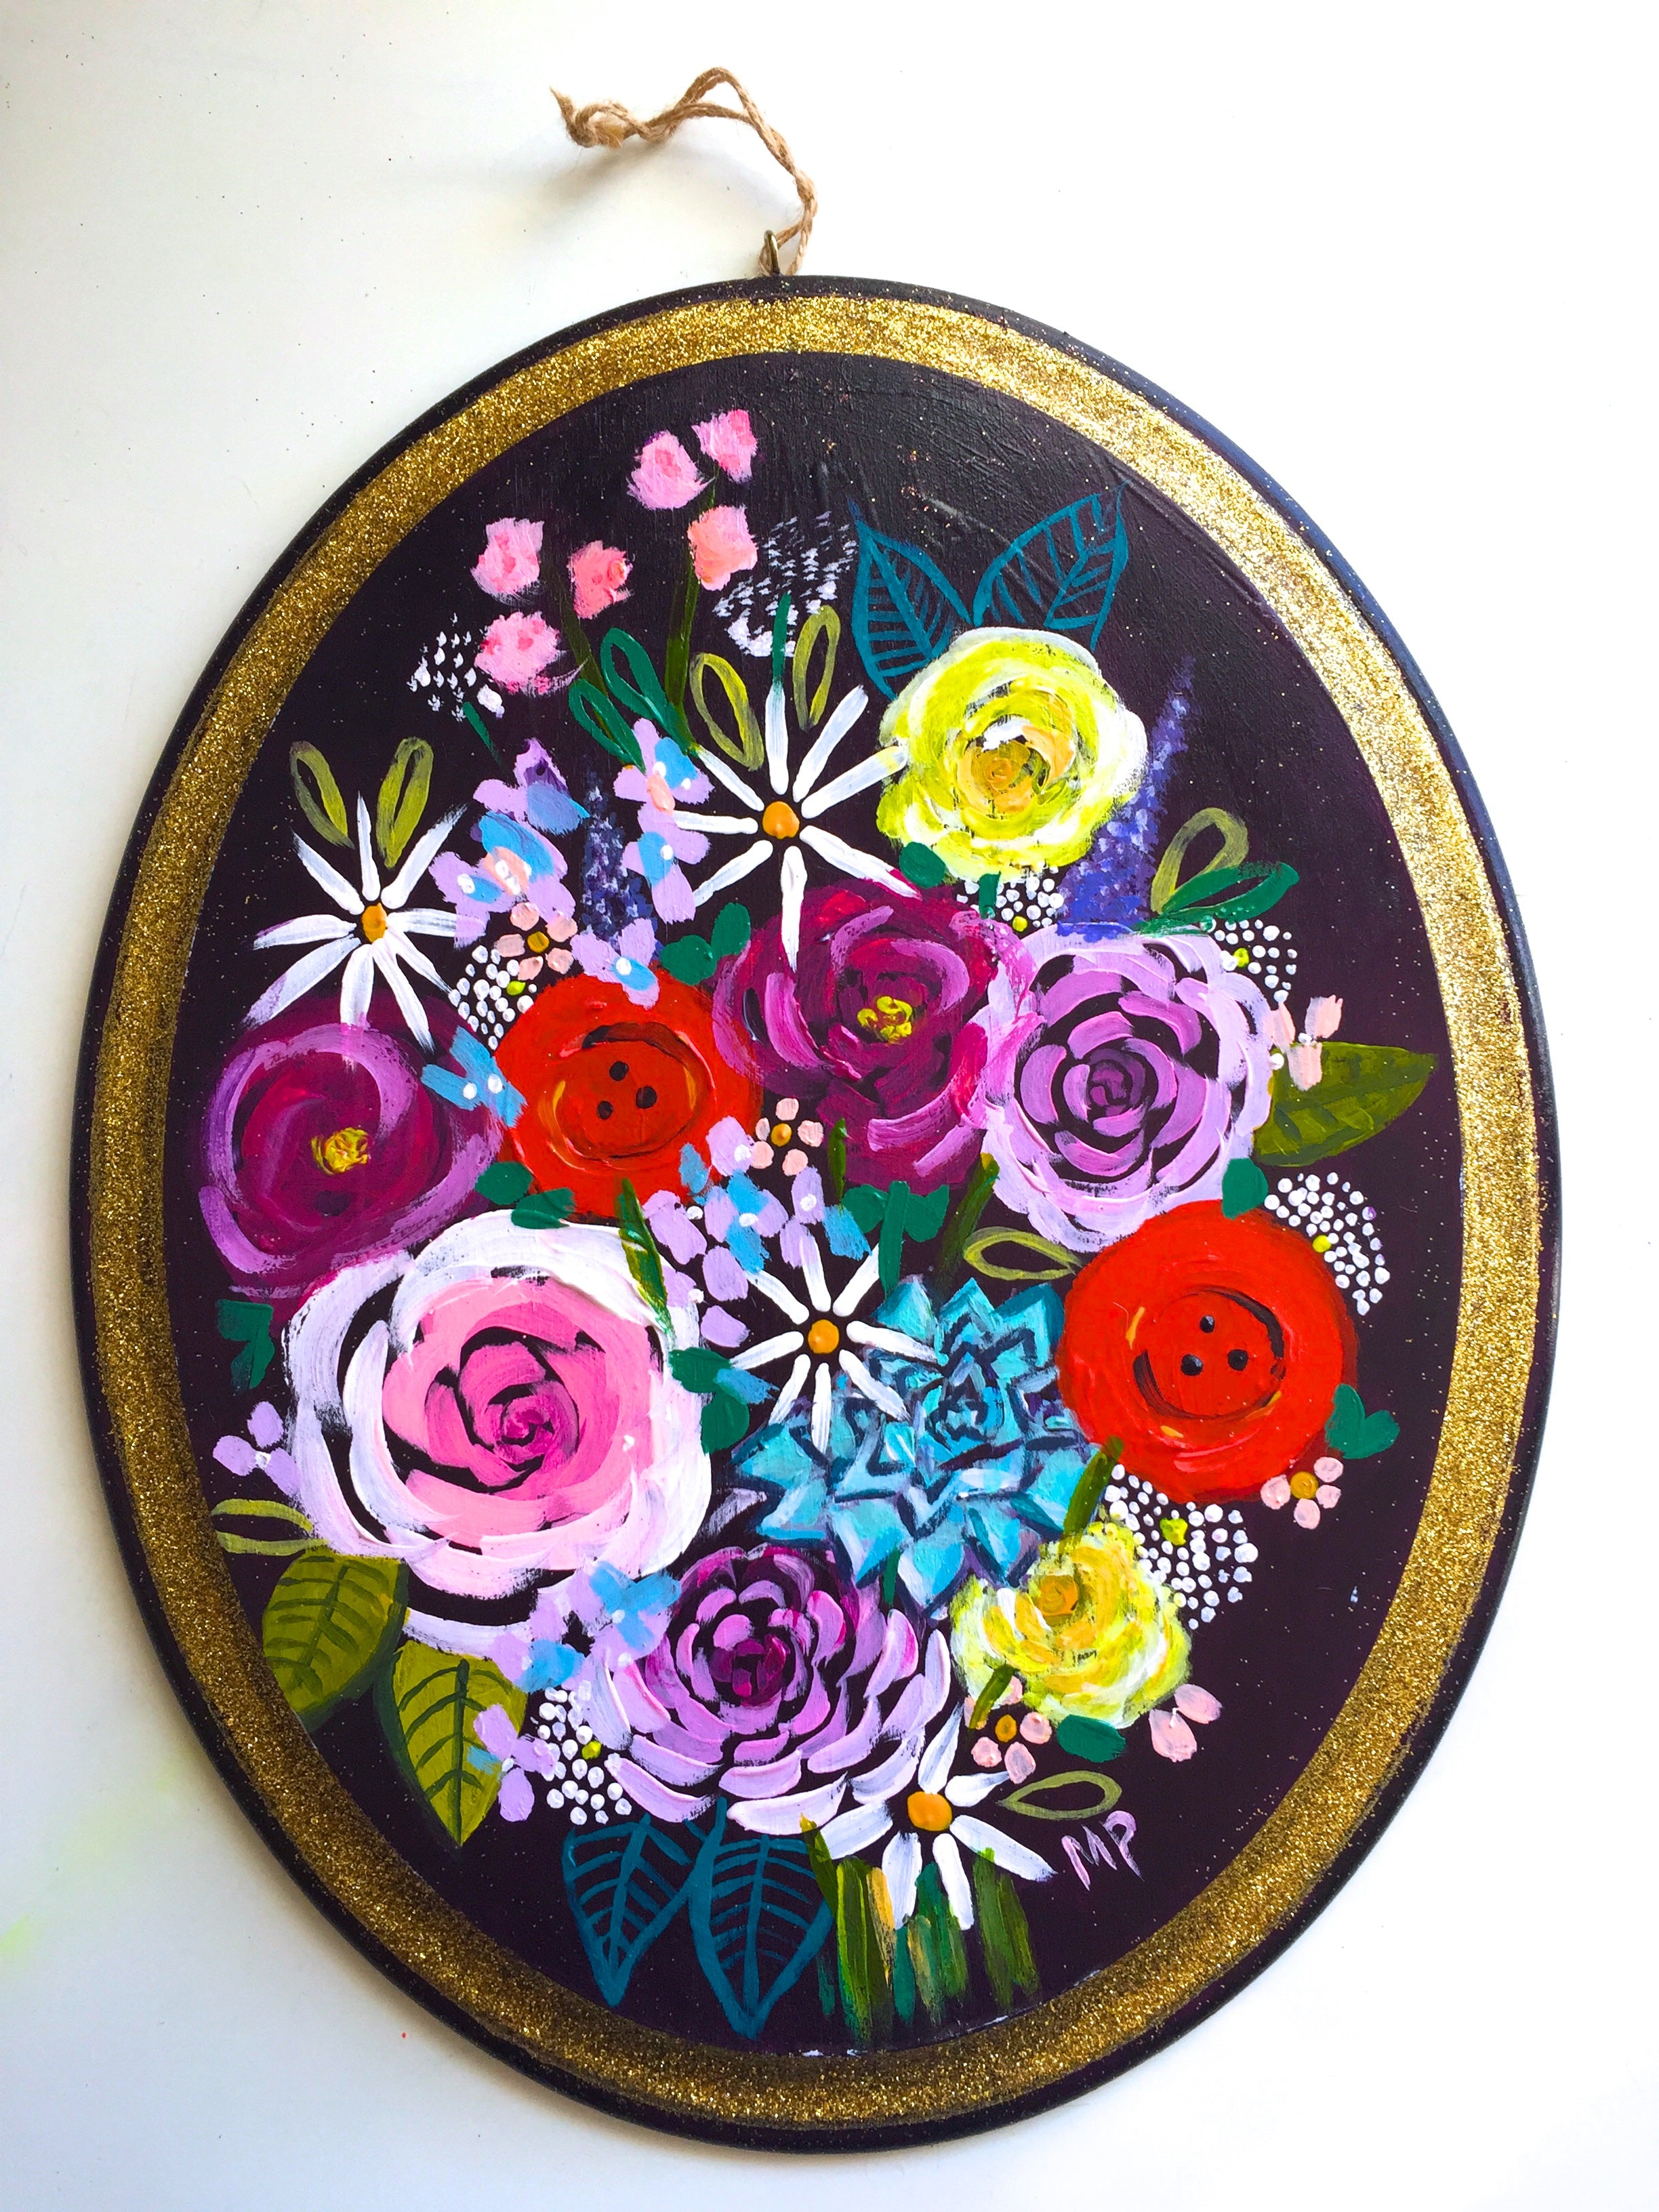 Wooden Oval Floral Painting with Vibrant Colorful Flower Bouquet